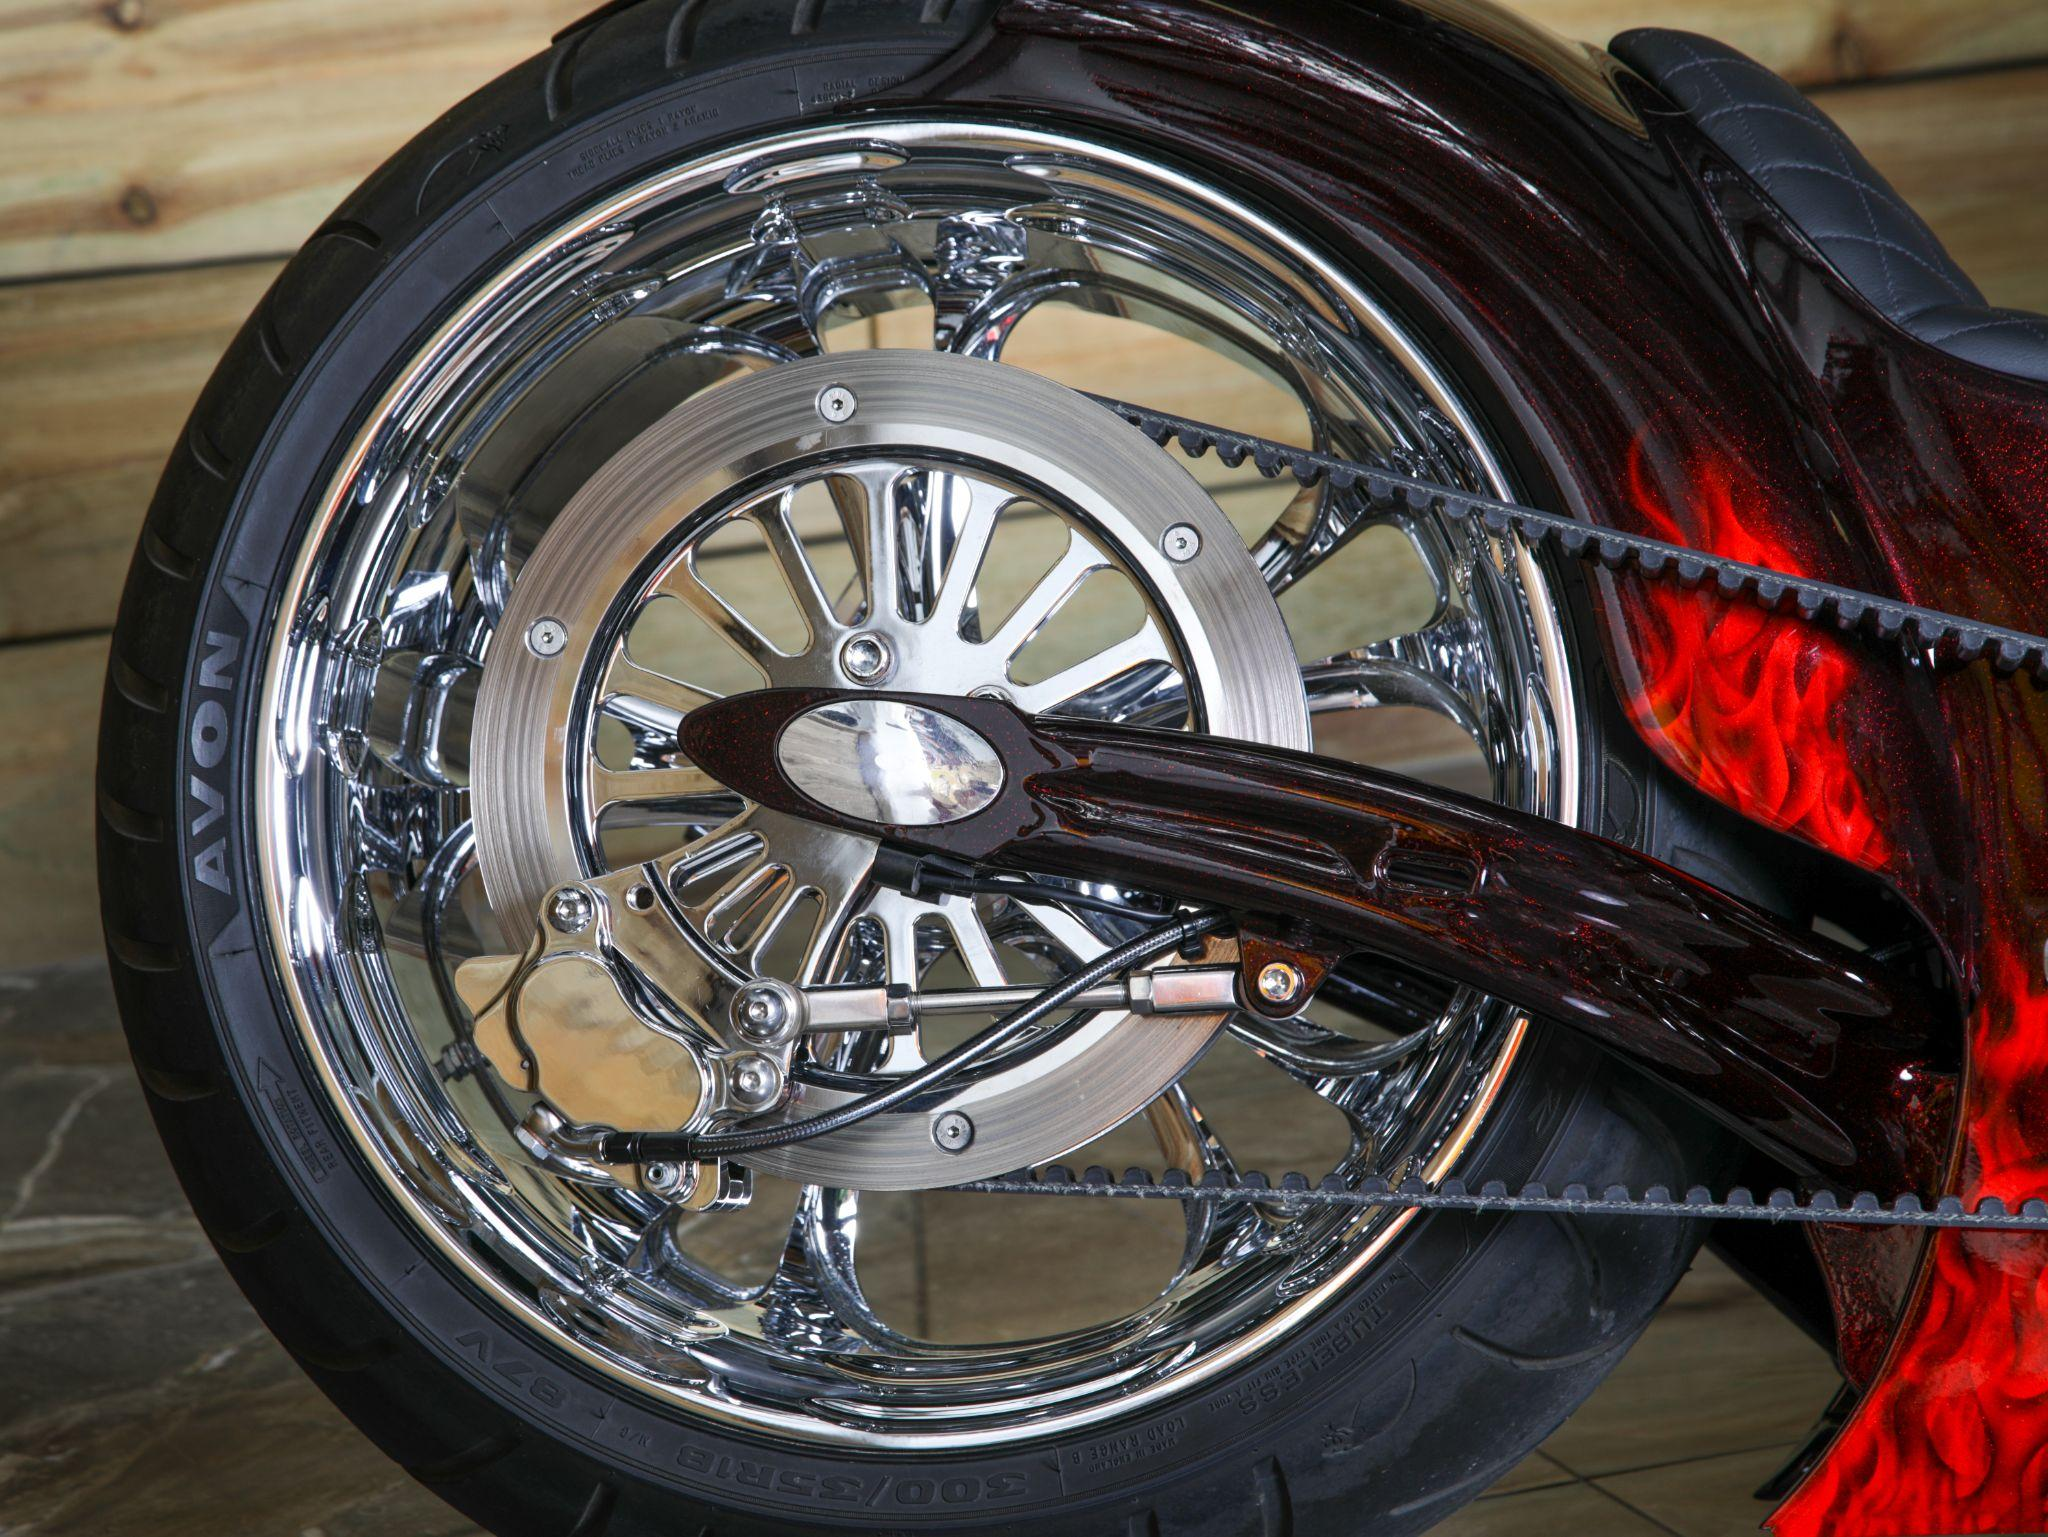 Custom motorcycle parts and accessories